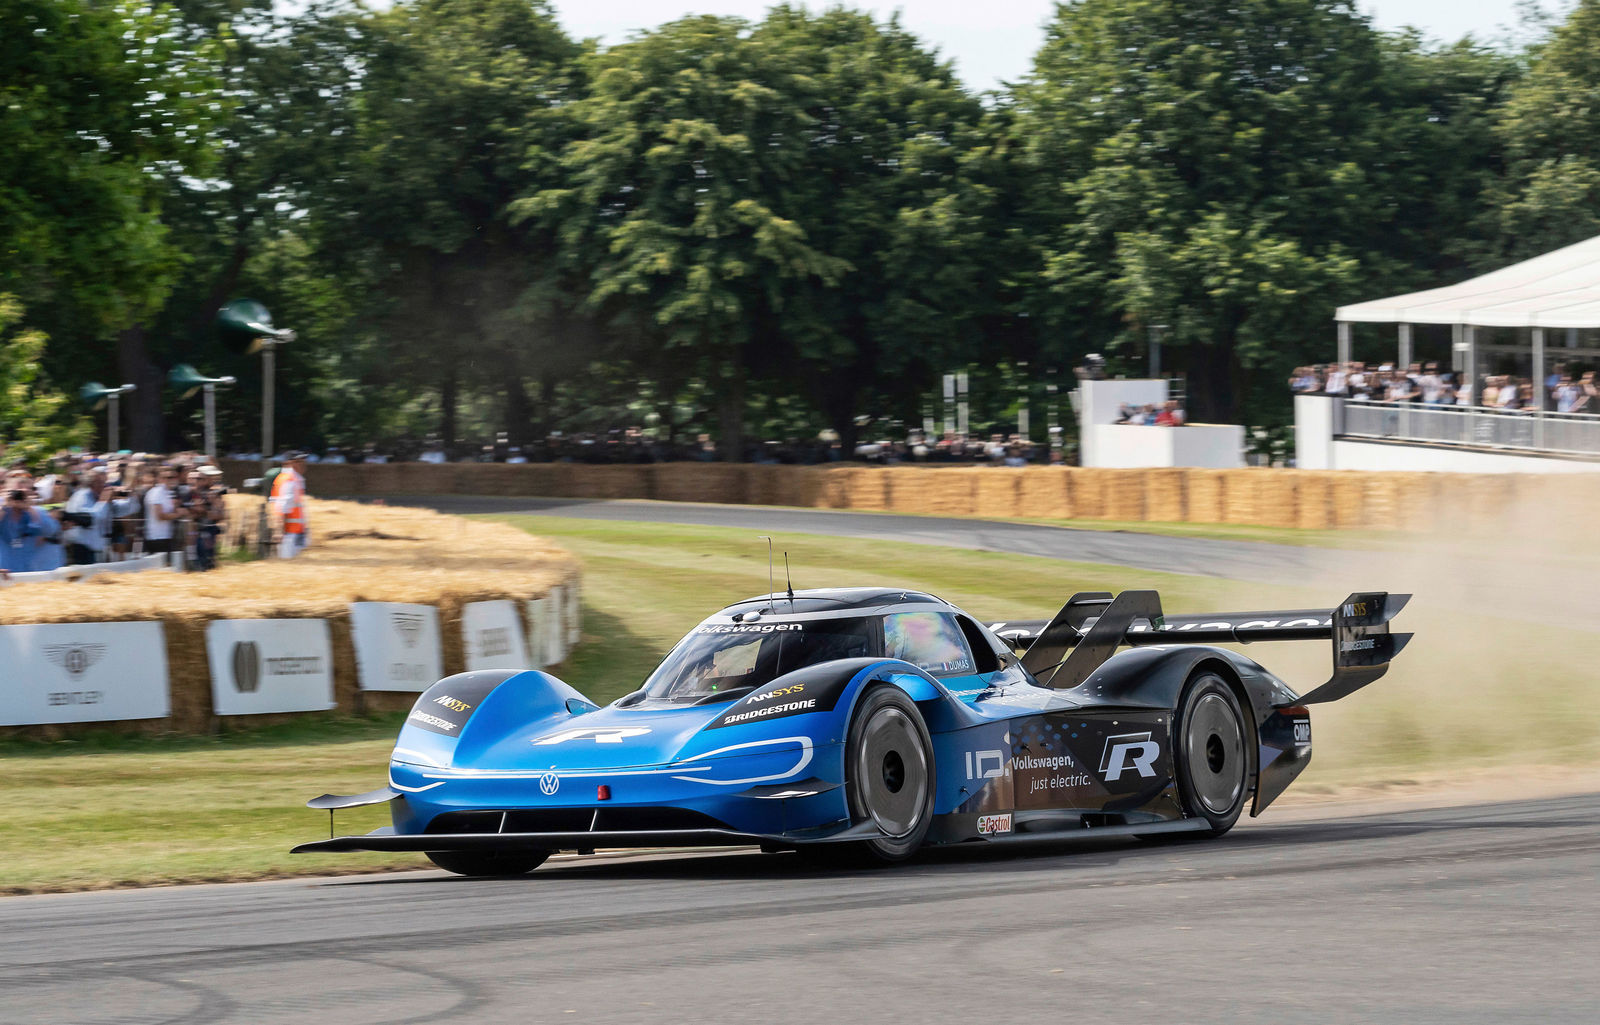 The electric Volkswagen ID.R is on the hunt for more records. Seen here at the Goodwood Festival of Speed (UK) 2019